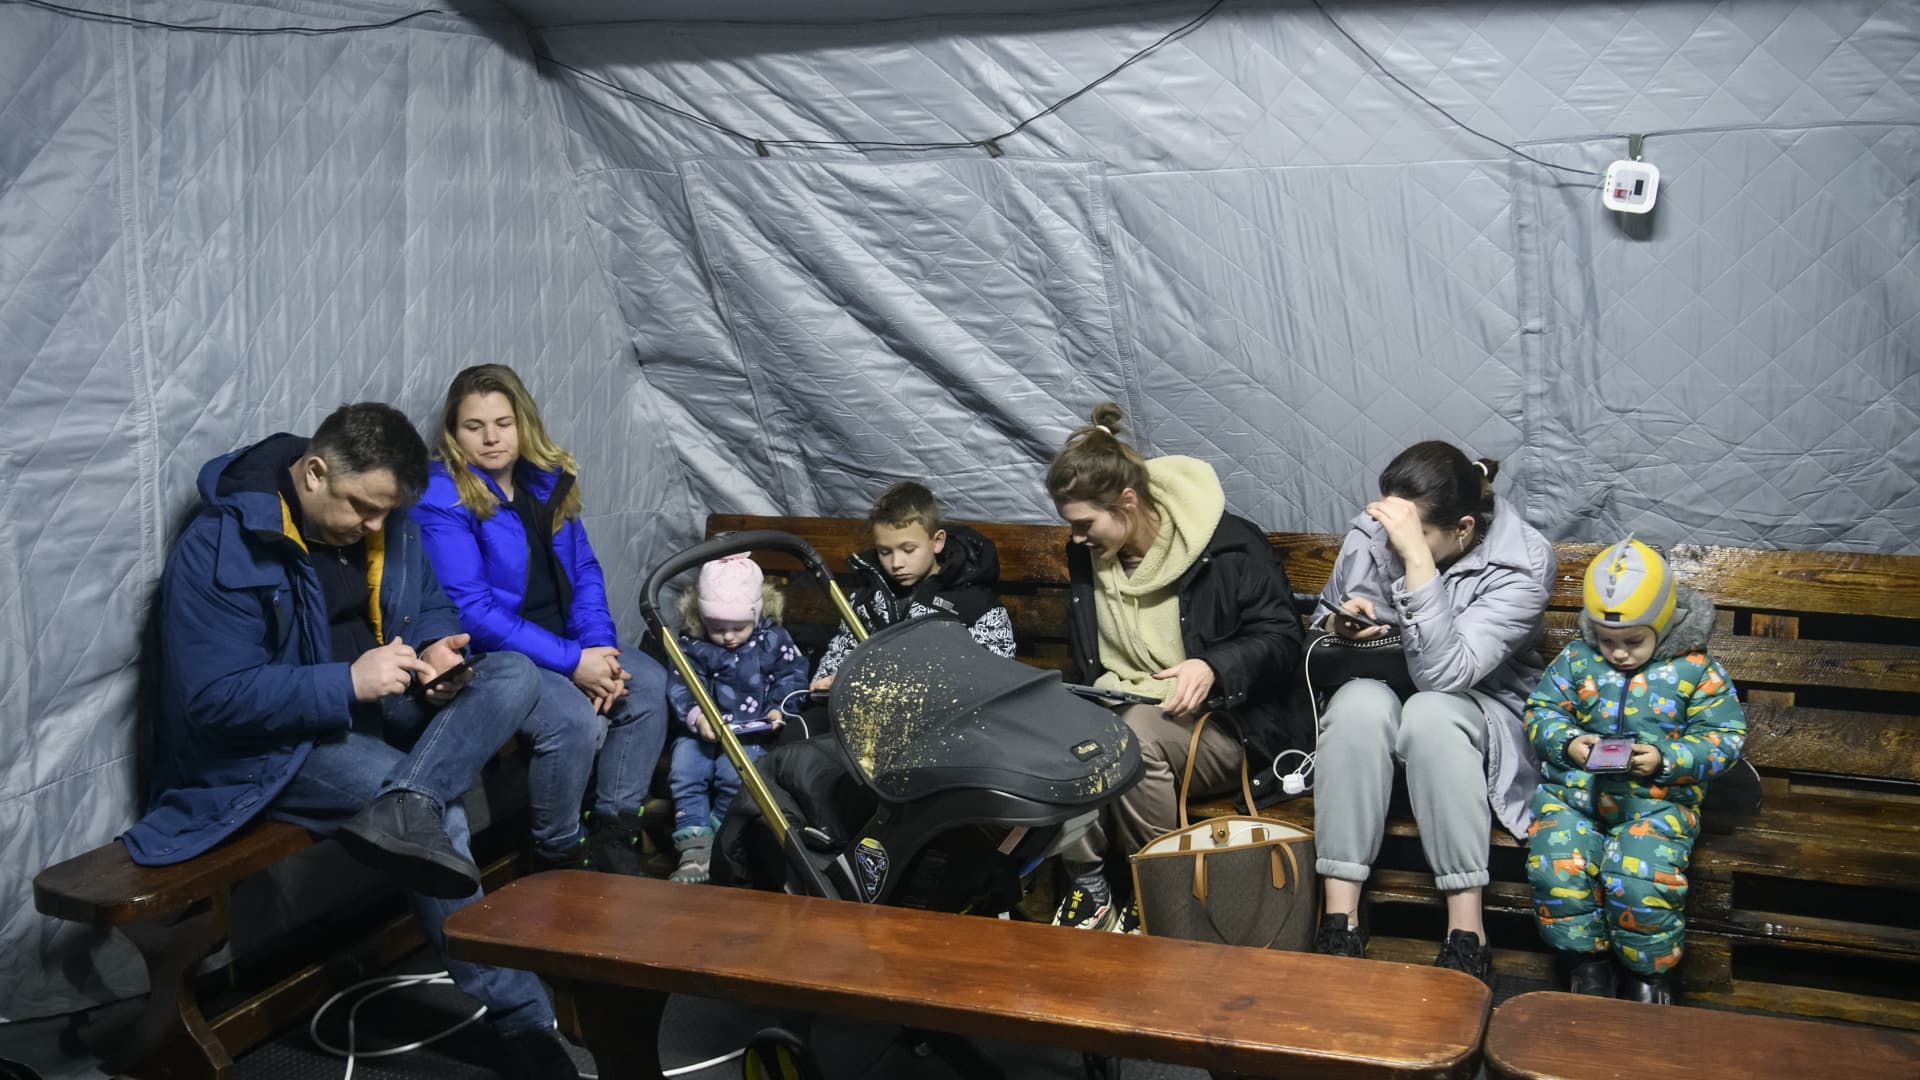 Local residents charge their devices, use internet connection and warm up after critical civil infrastructure was hit by Russian missile attacks in Kyiv, Ukraine, on Nov. 24, 2022.